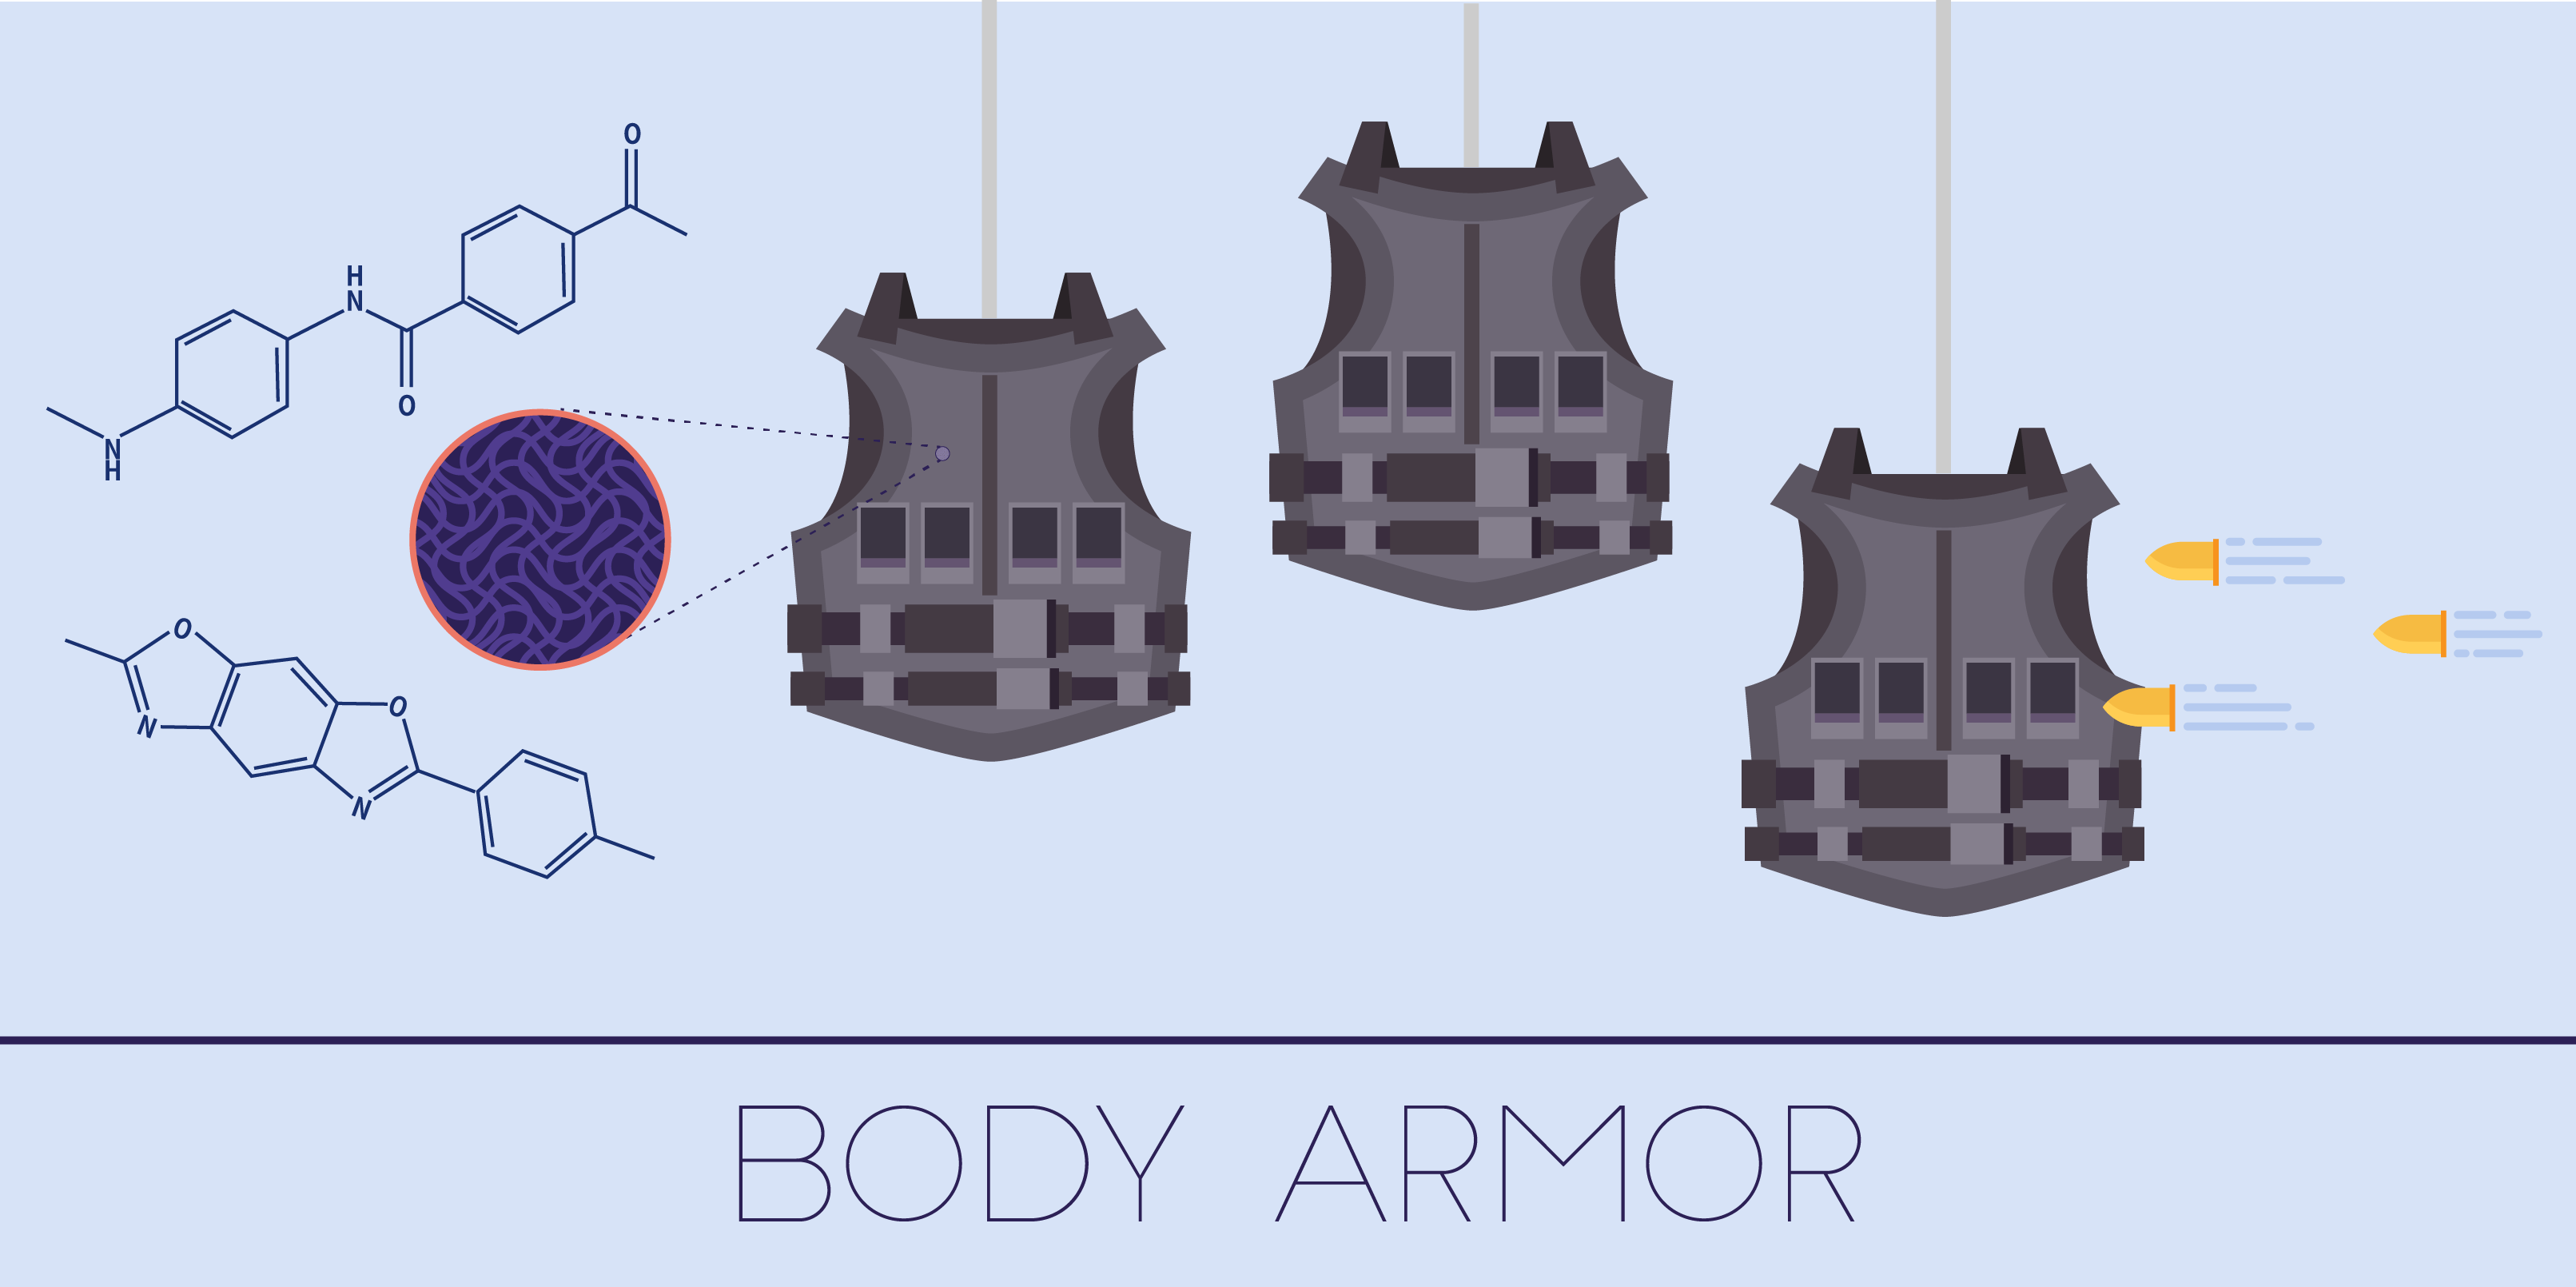 Illustration says "Body Armor" with images of bullets, vests and chemical formulas.